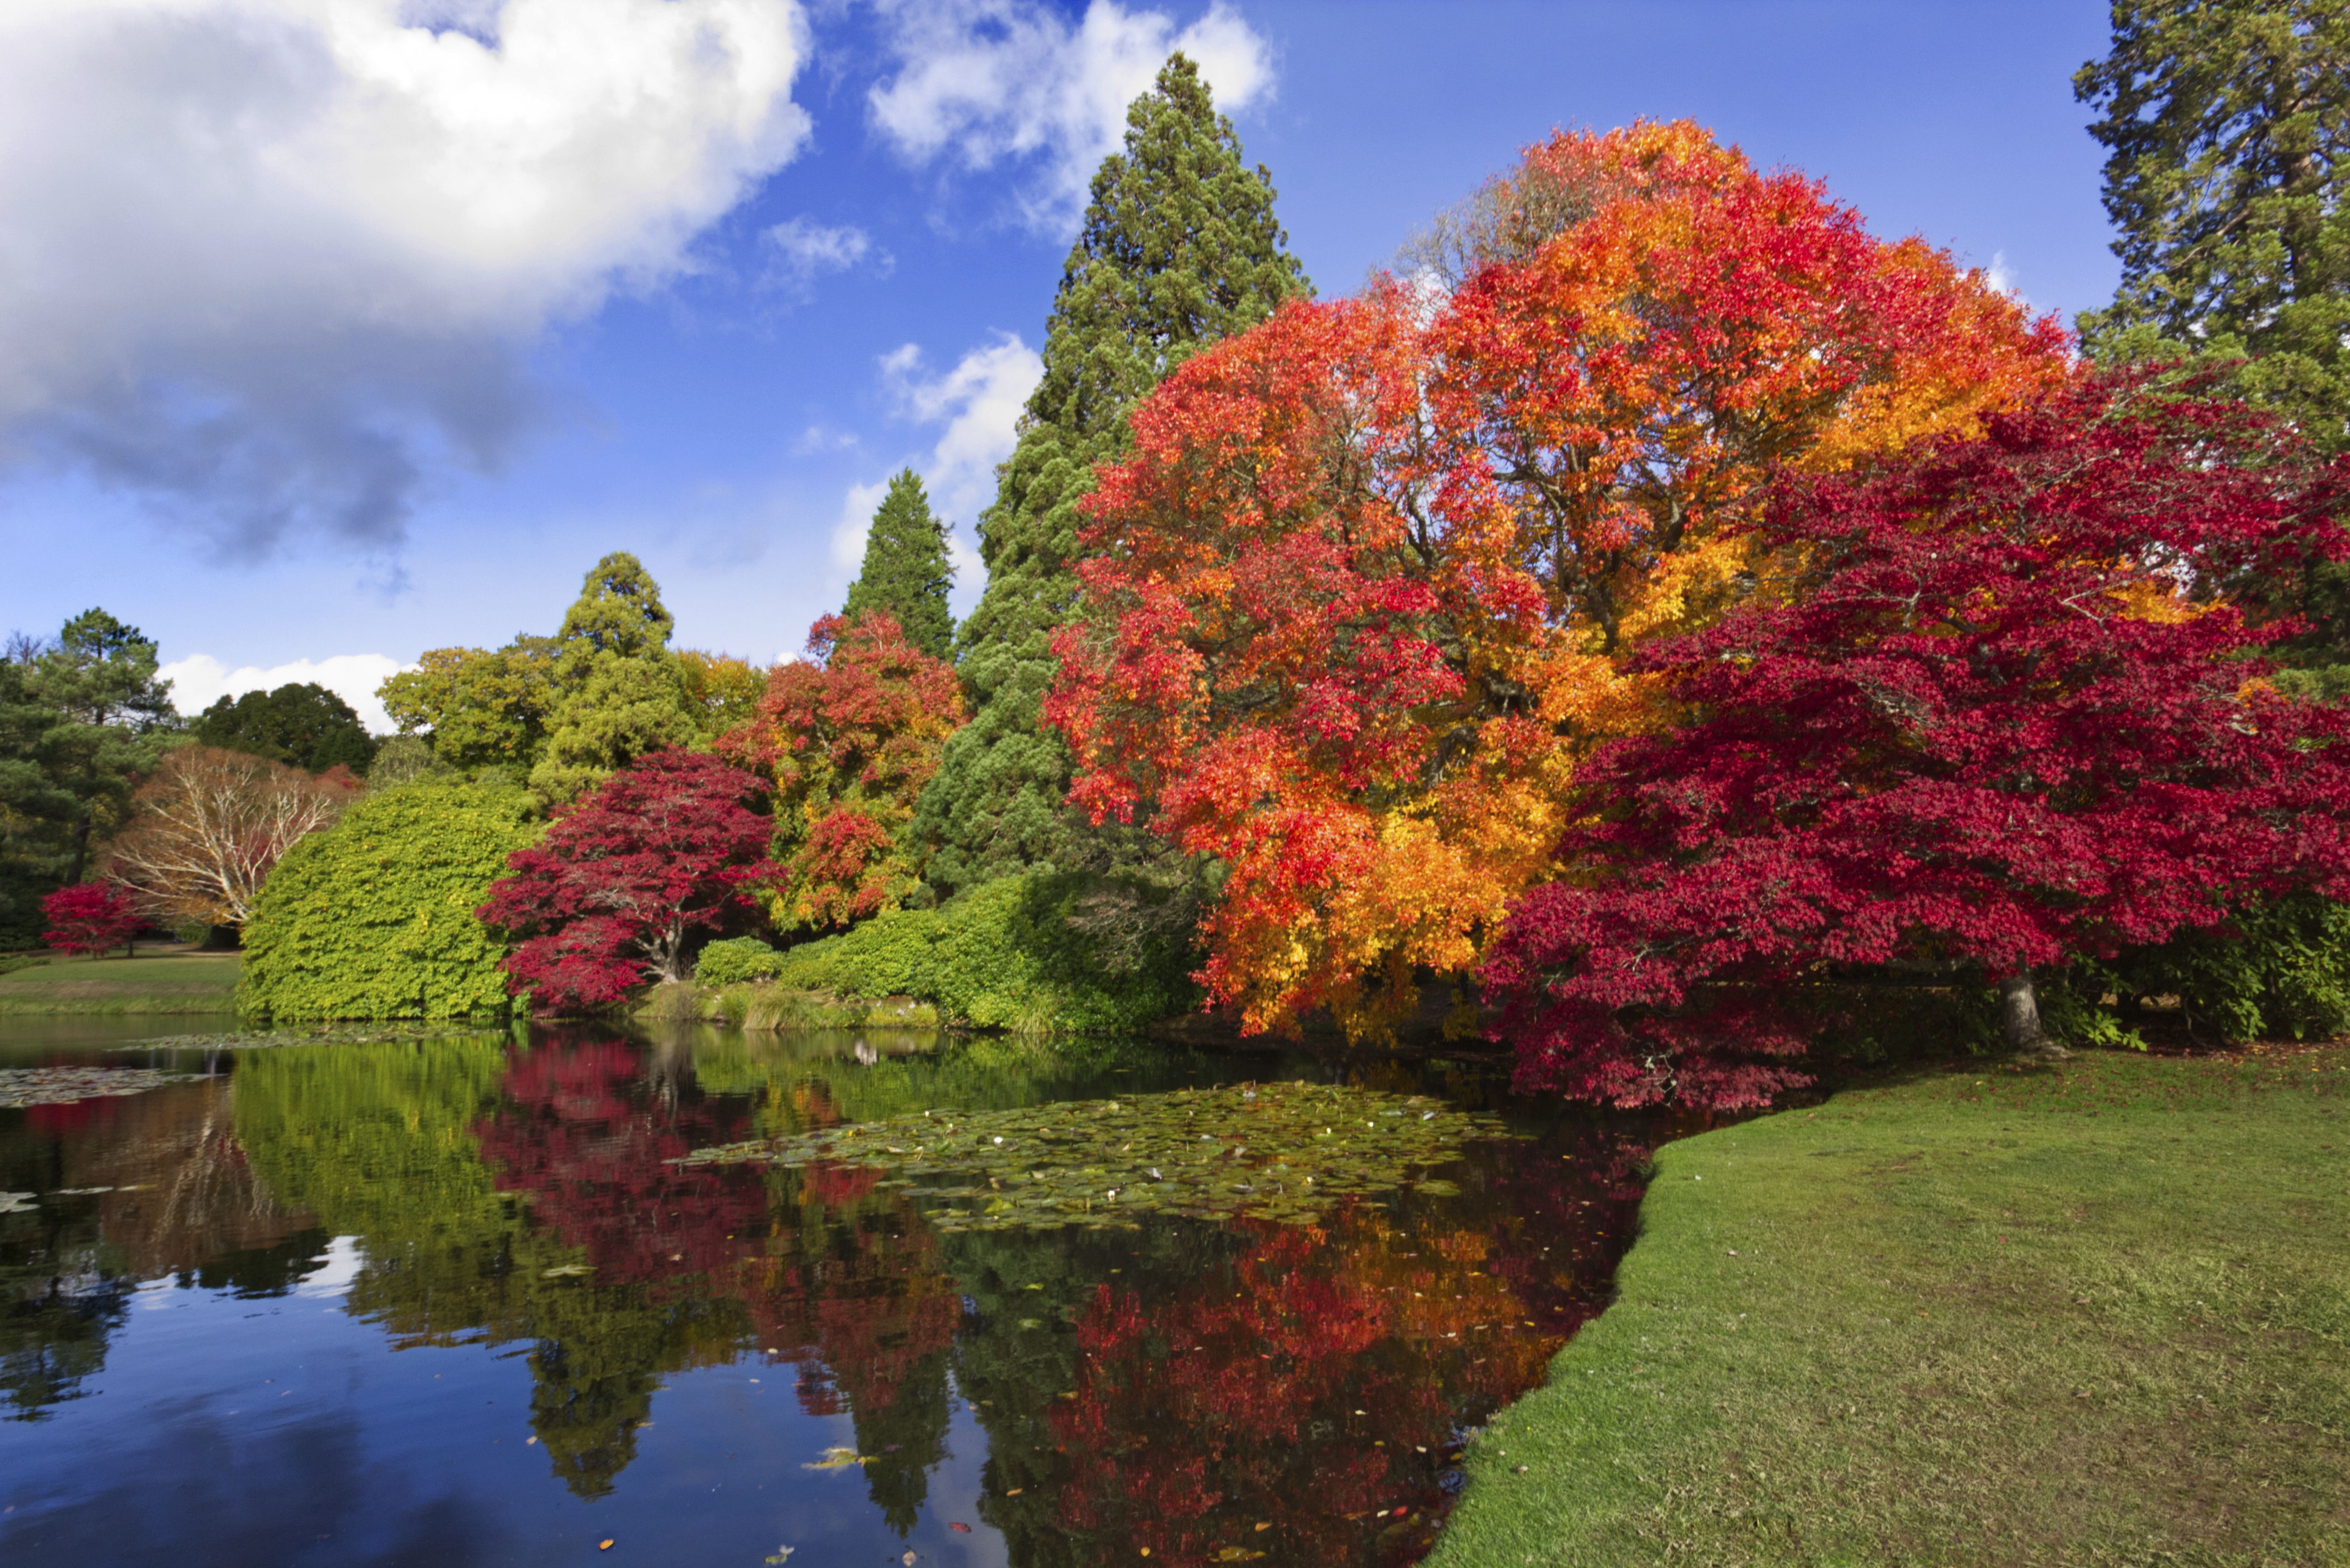 Extreme weather affecting autumn leaves spectacular, warns National Trust